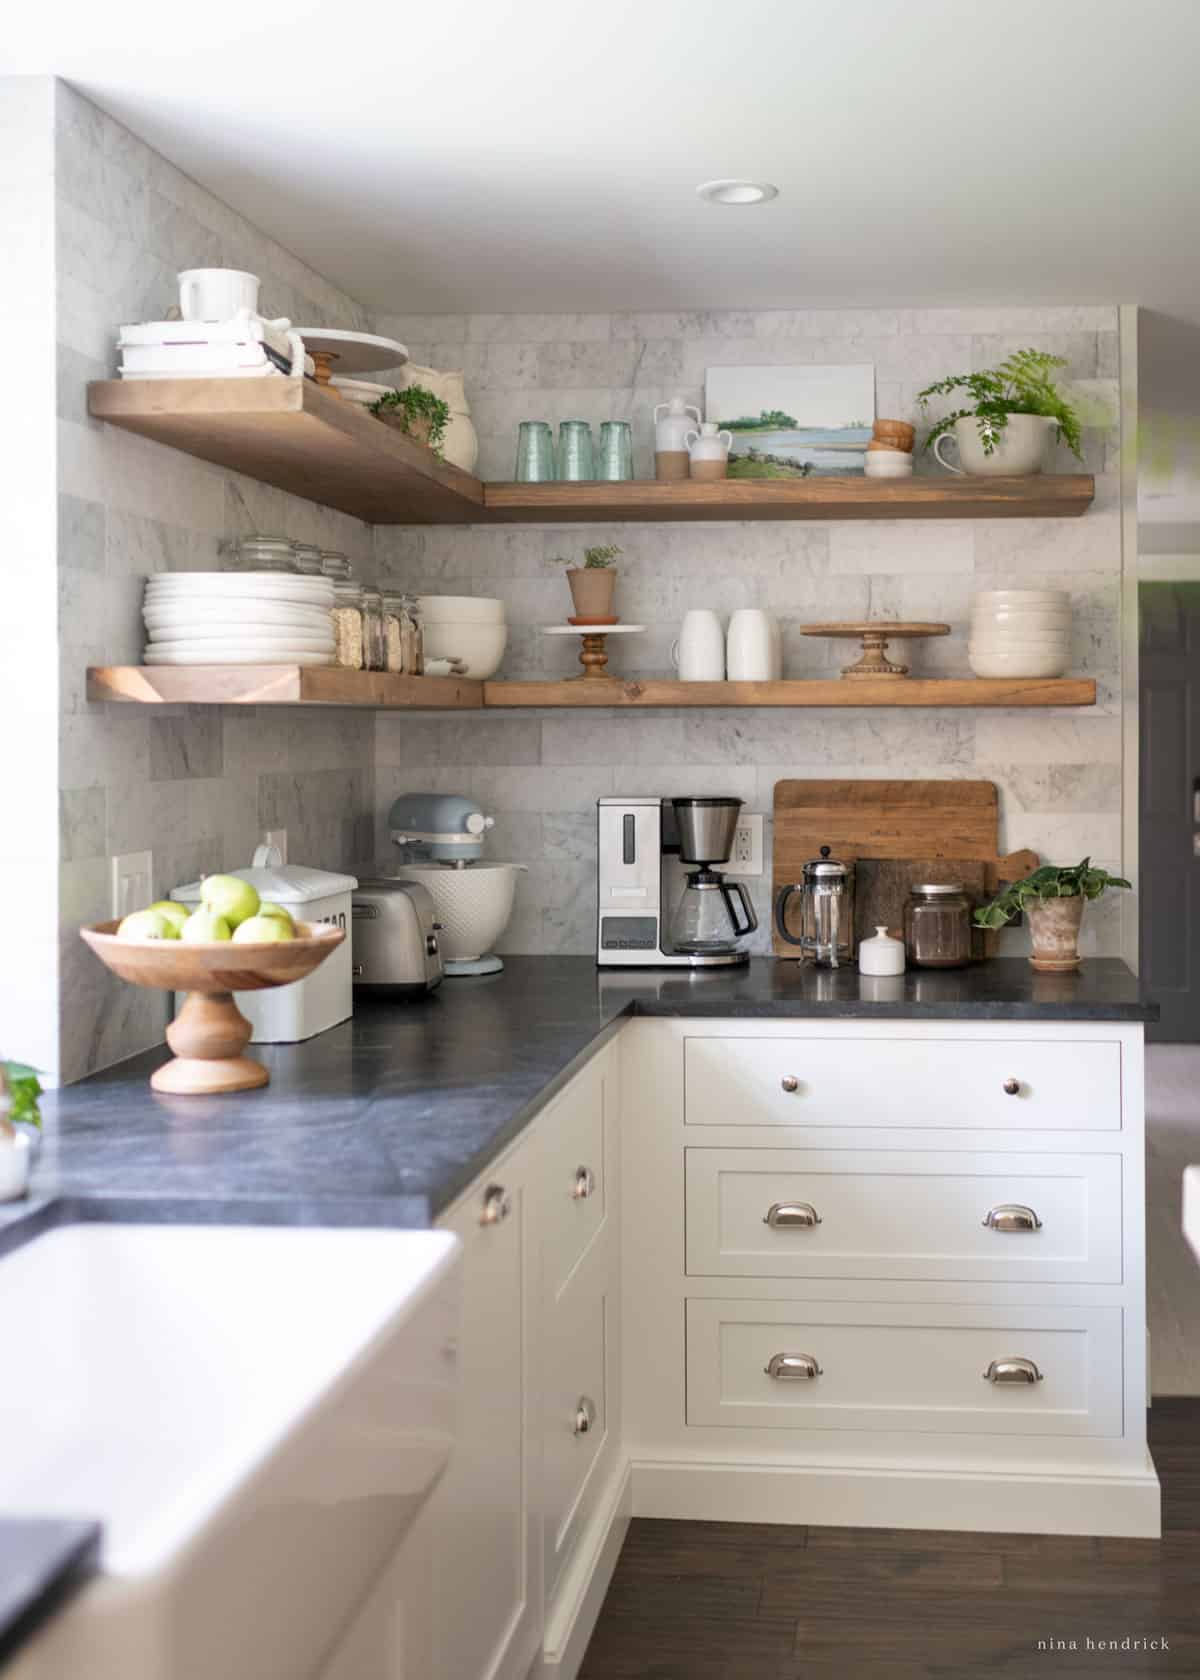 Kitchen shelf decorating ideas that mix style and practicality